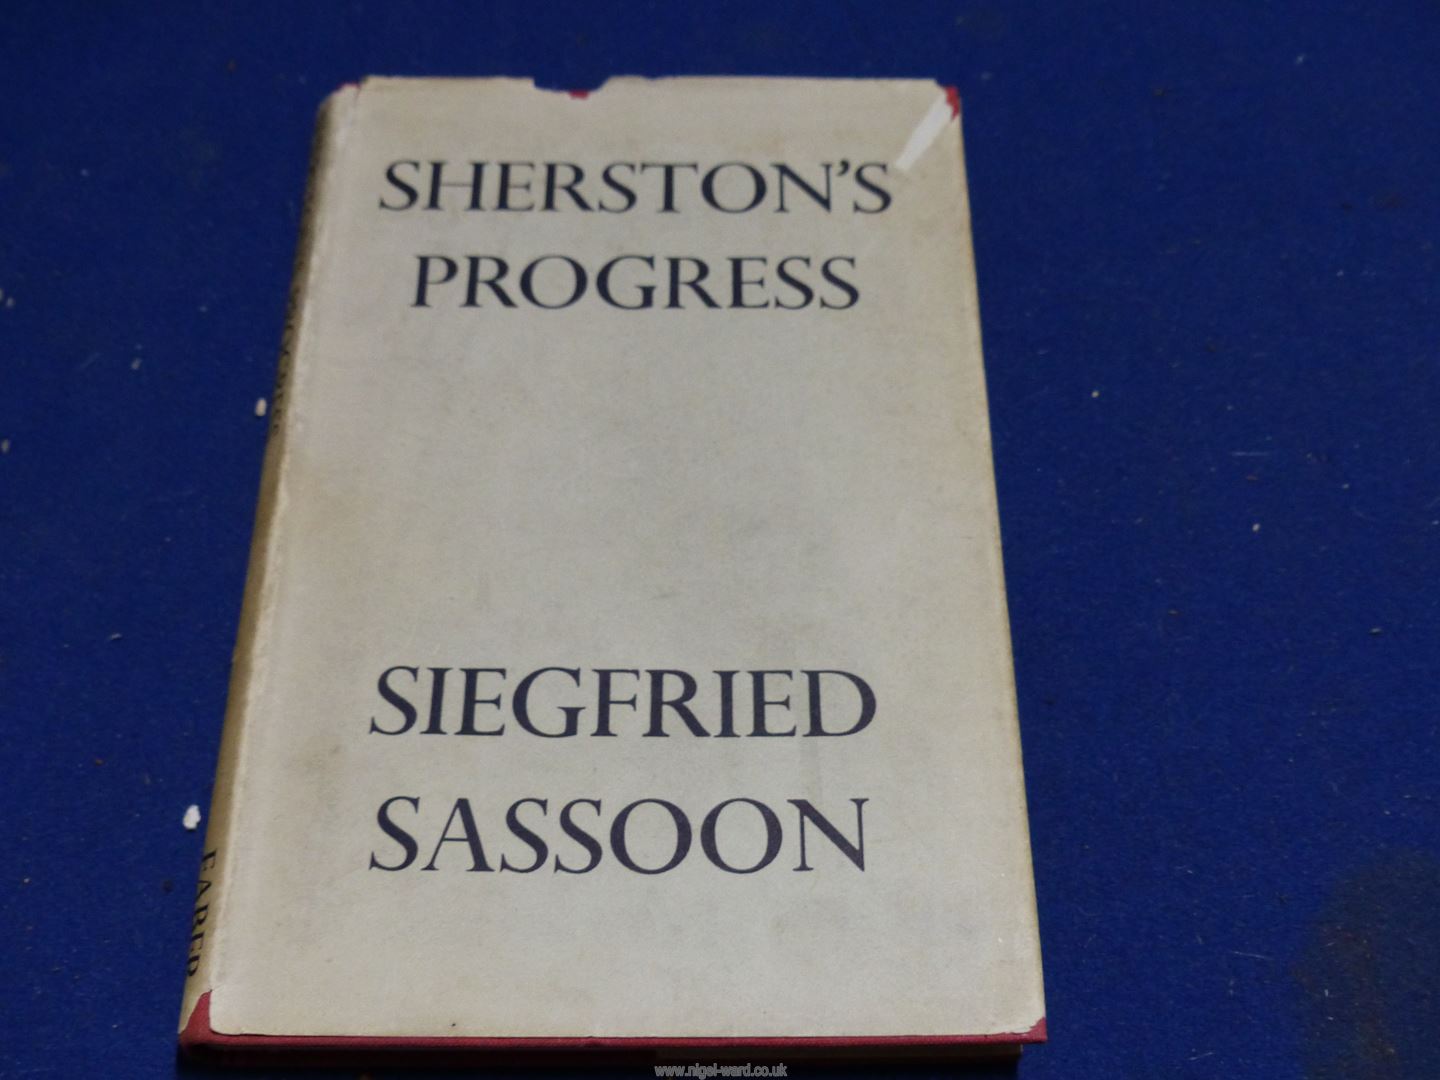 A small collection of works by Siegfried Sassoon including Memoirs of a Fox-Hunting Gentleman - Image 2 of 29